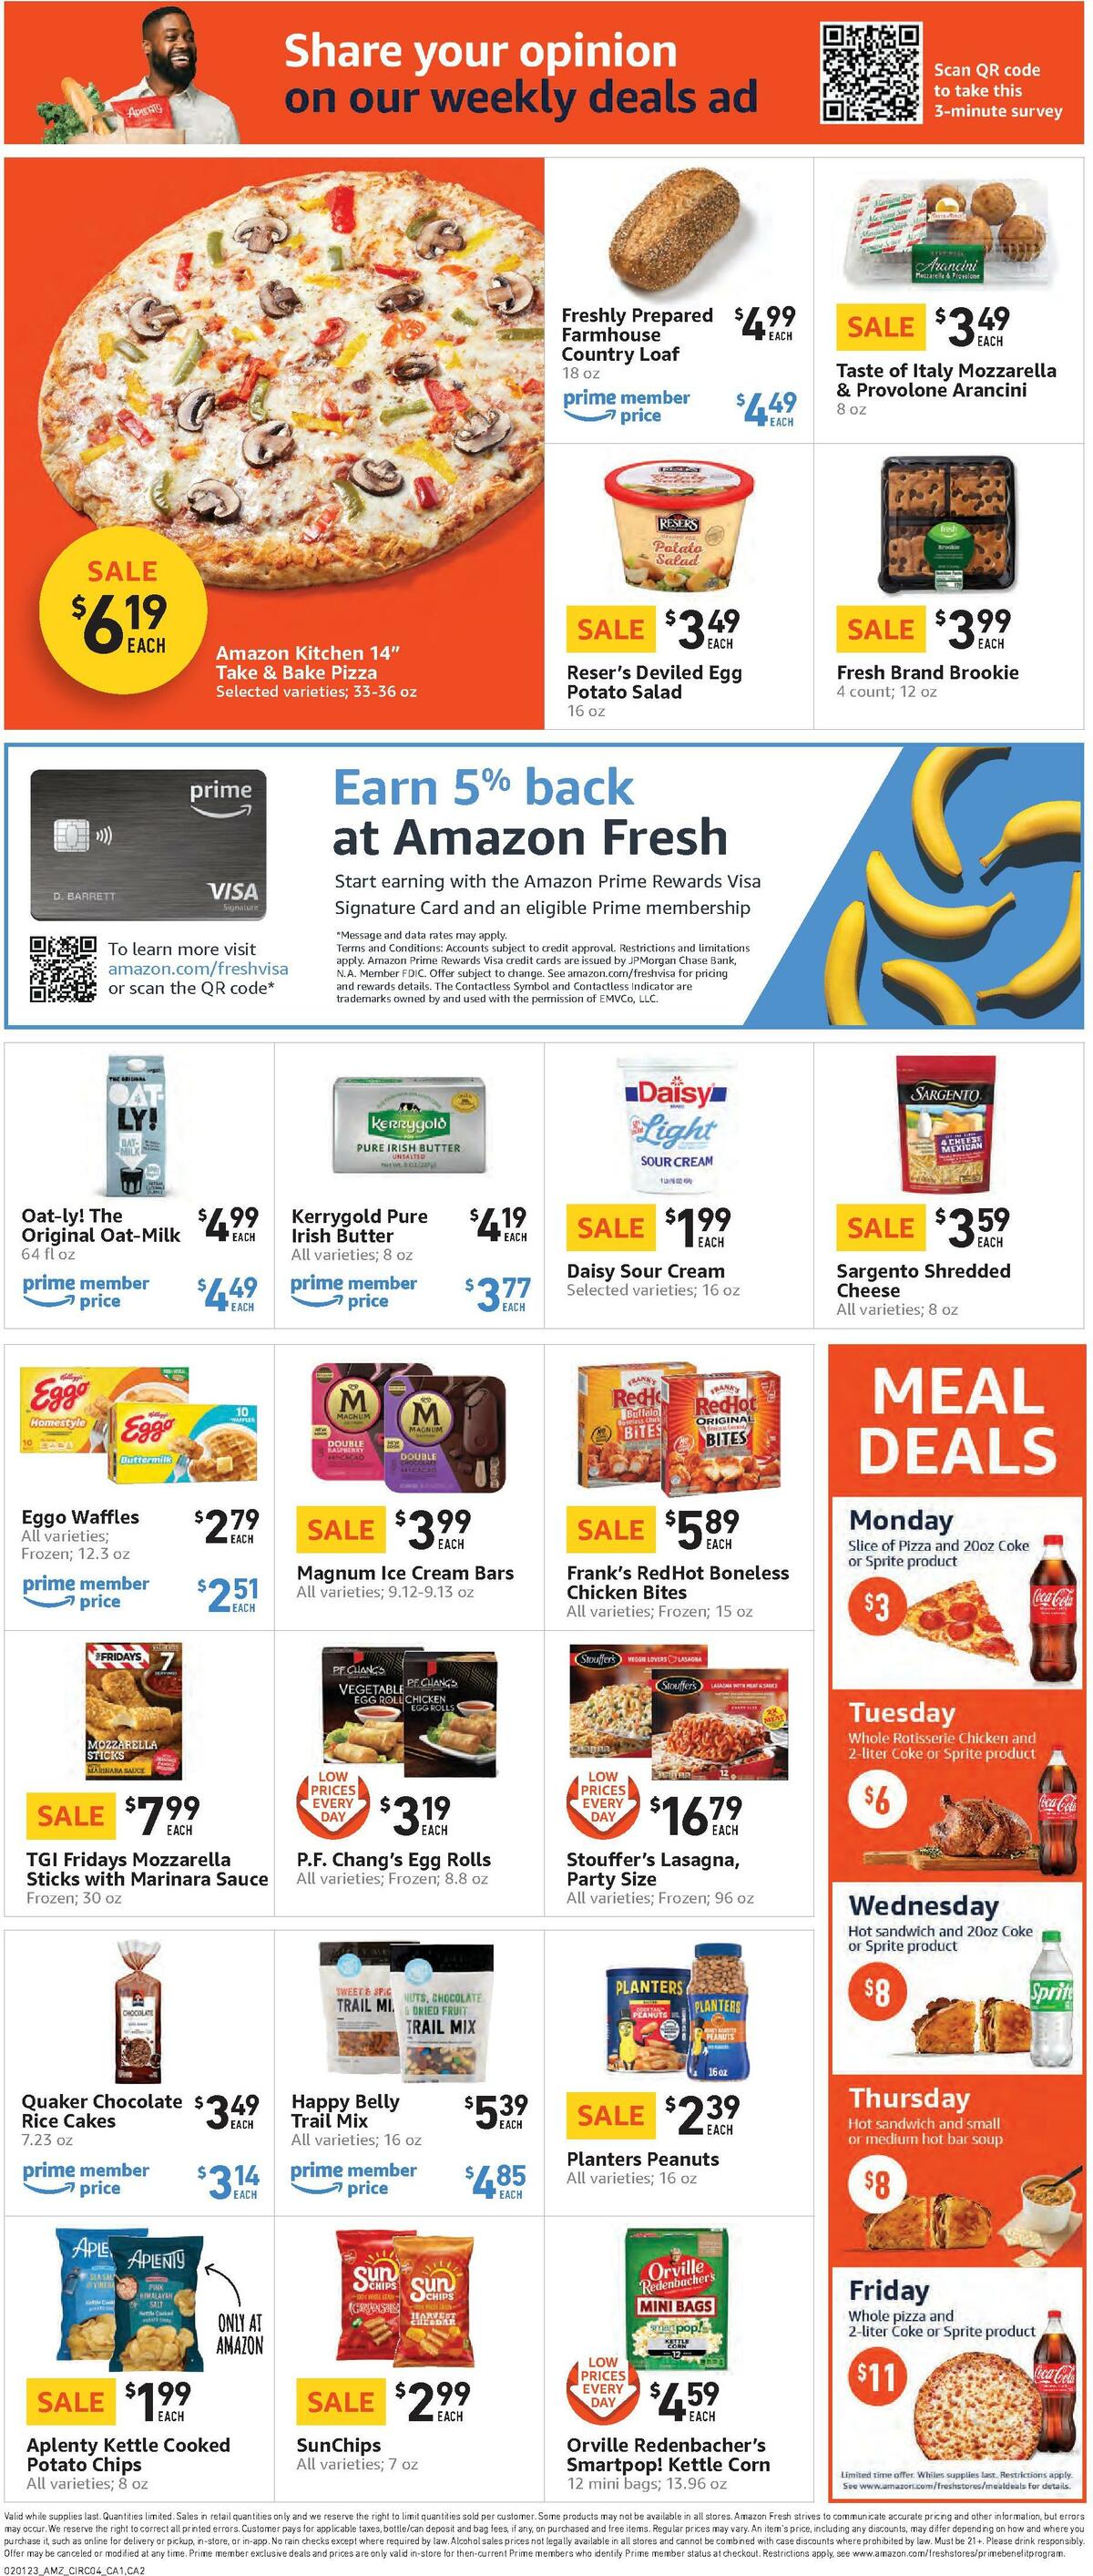 Amazon Fresh Weekly Ad from February 1